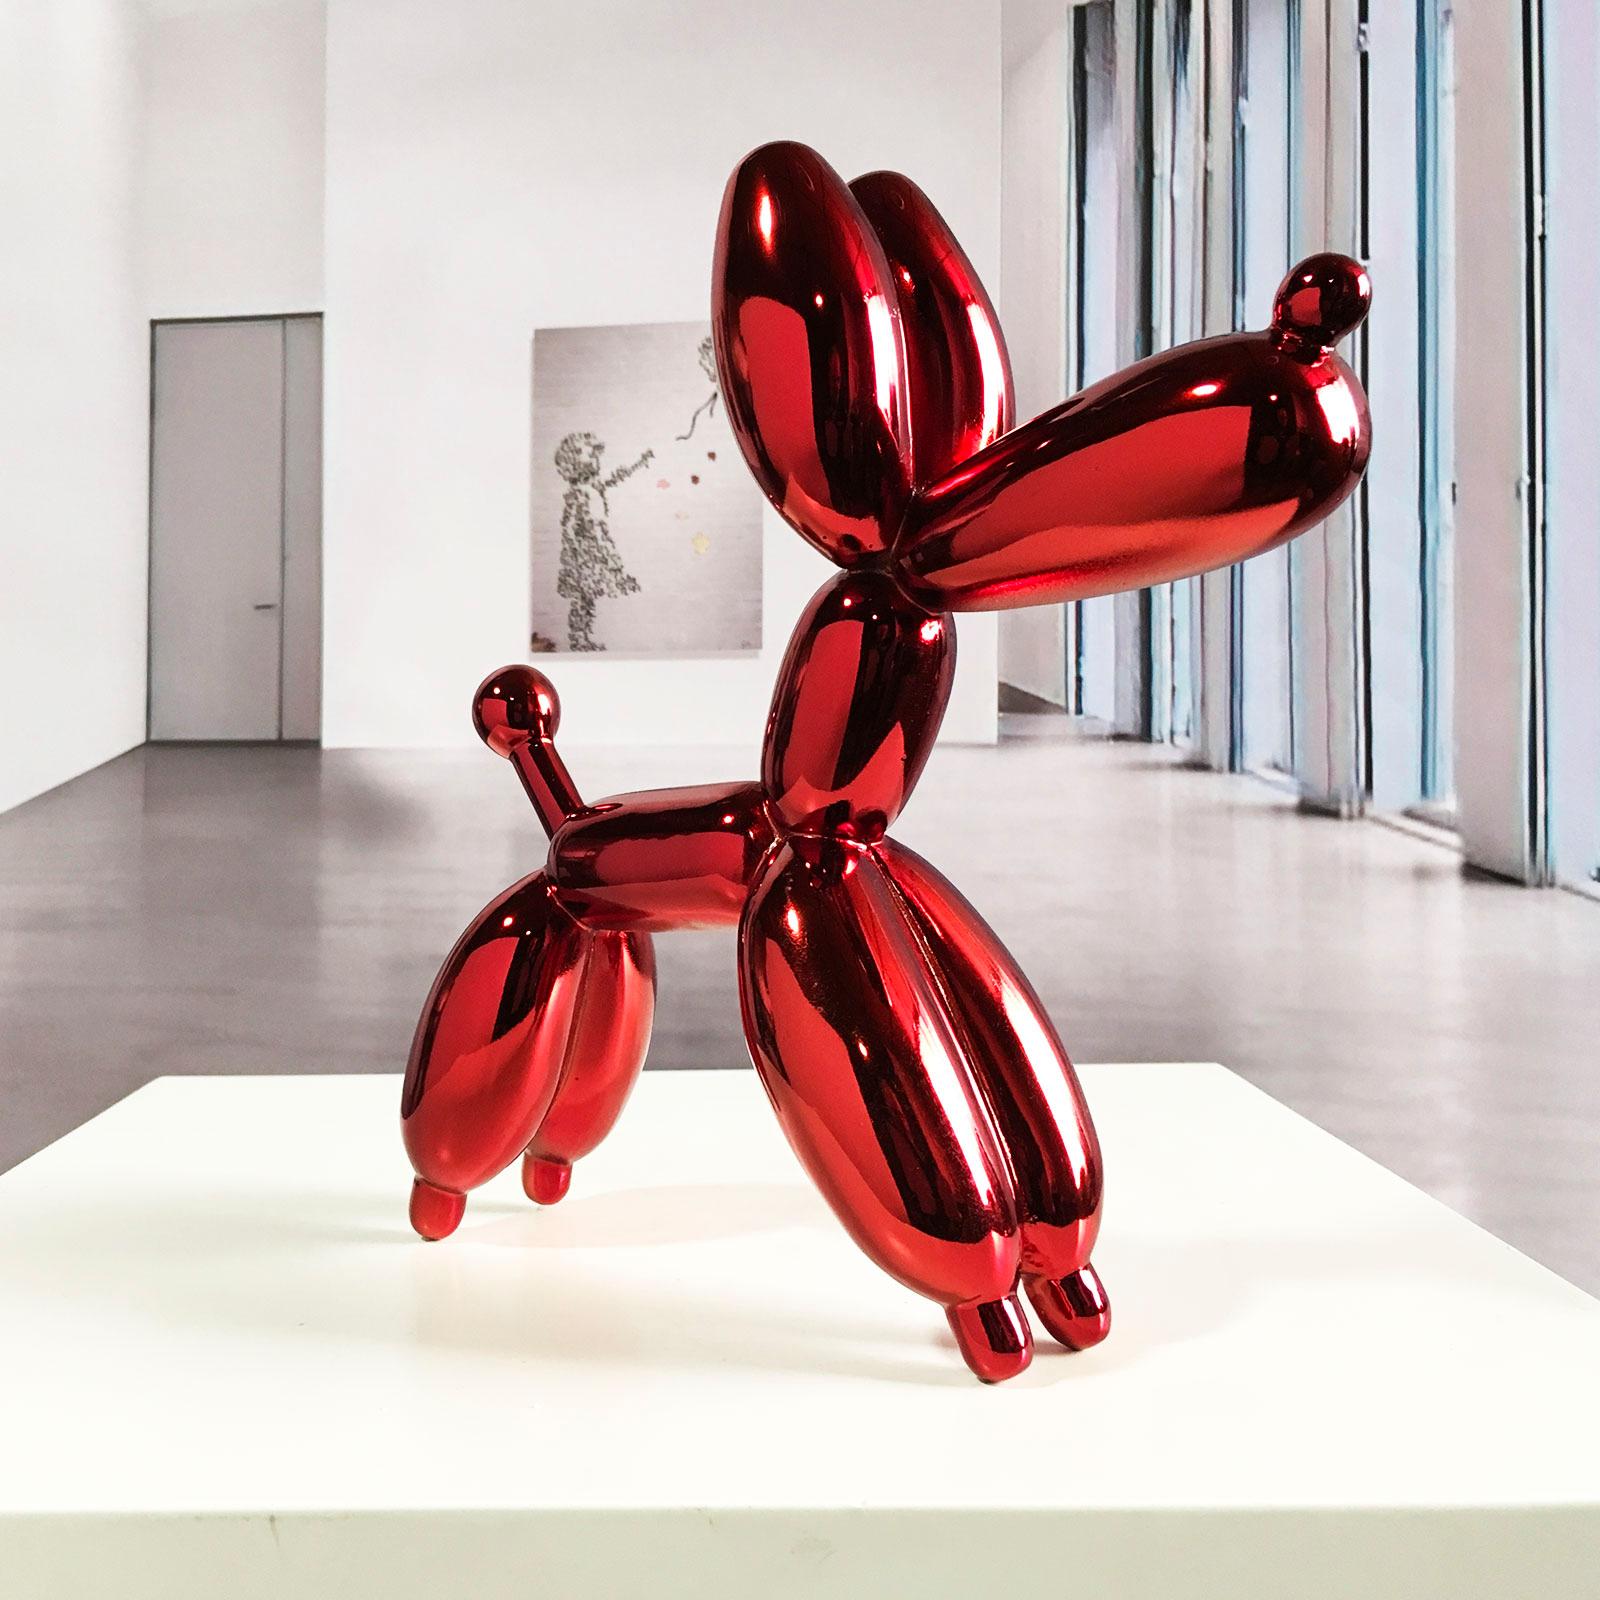 Pop Art Sculpture "Red Dog Balloon 21" by Miguel Guía.
The sculpture is made of a layer of nickel on cold smelting of copper with the base of graphite or marble dust.
Limited edition of 299 works.
Although the required time to deliver a shipment is